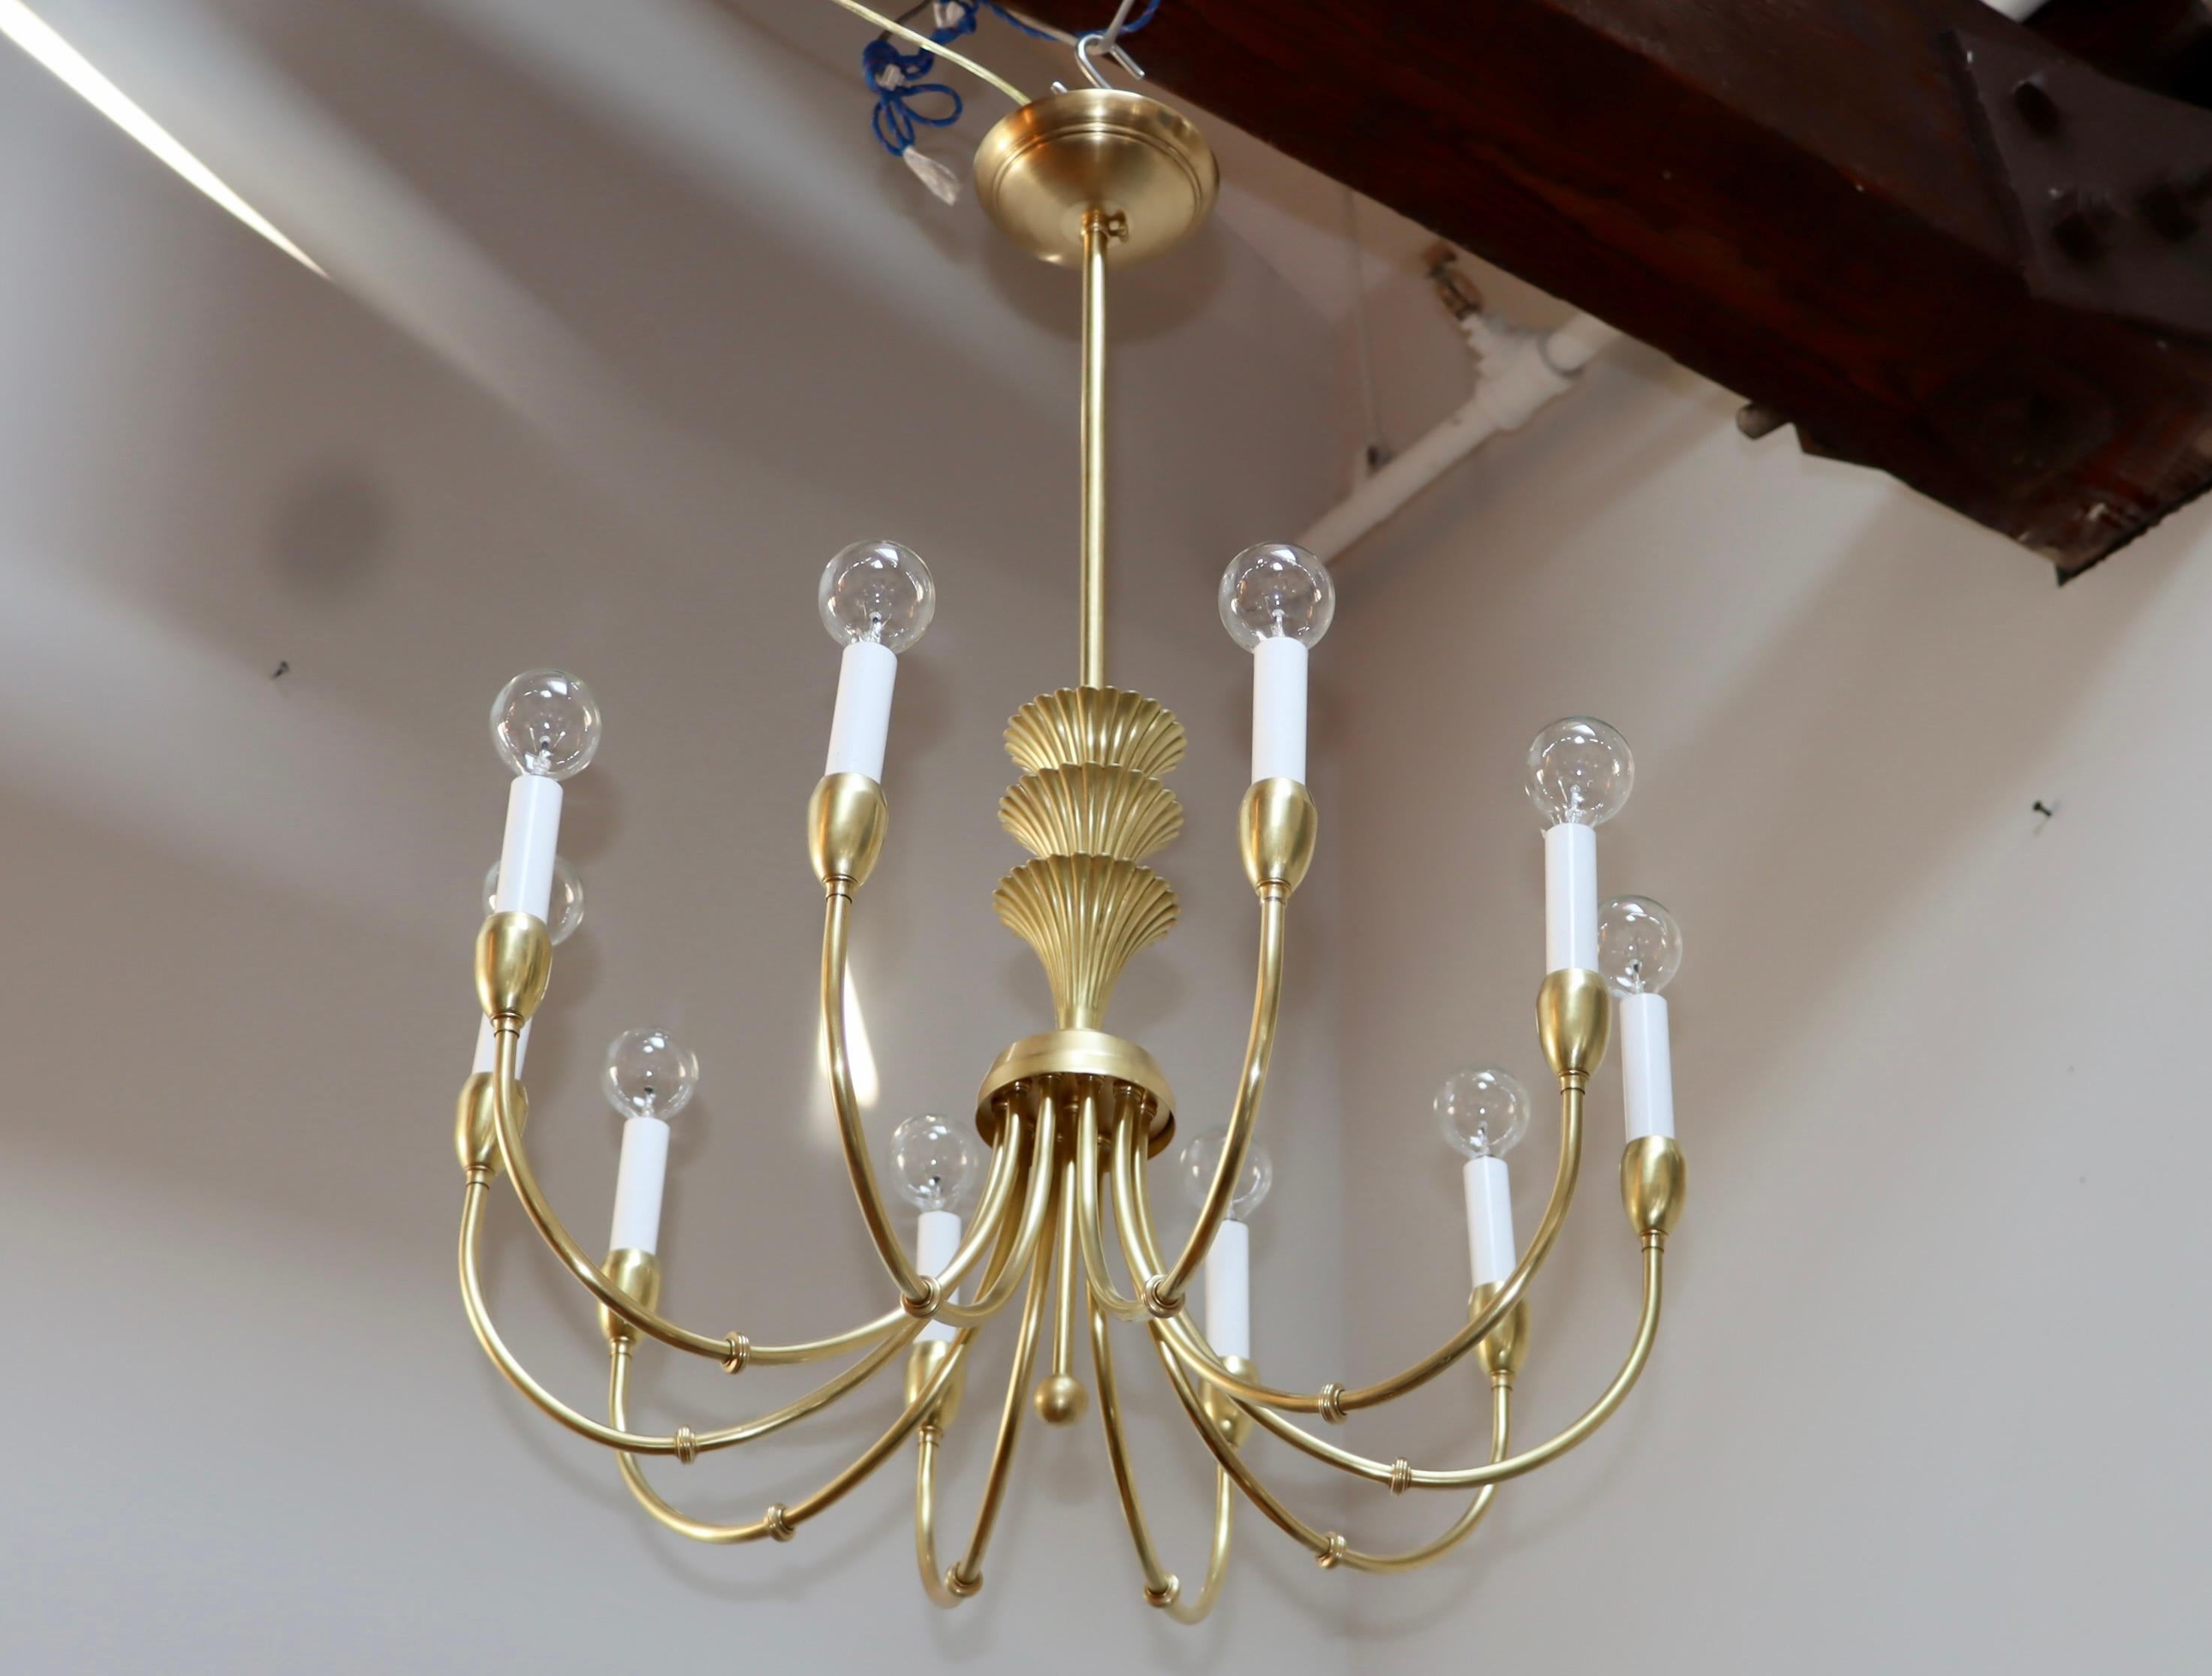 1950s Italian Brass 10 Arm Chandelier in the Style of Gio Ponti For Sale 3